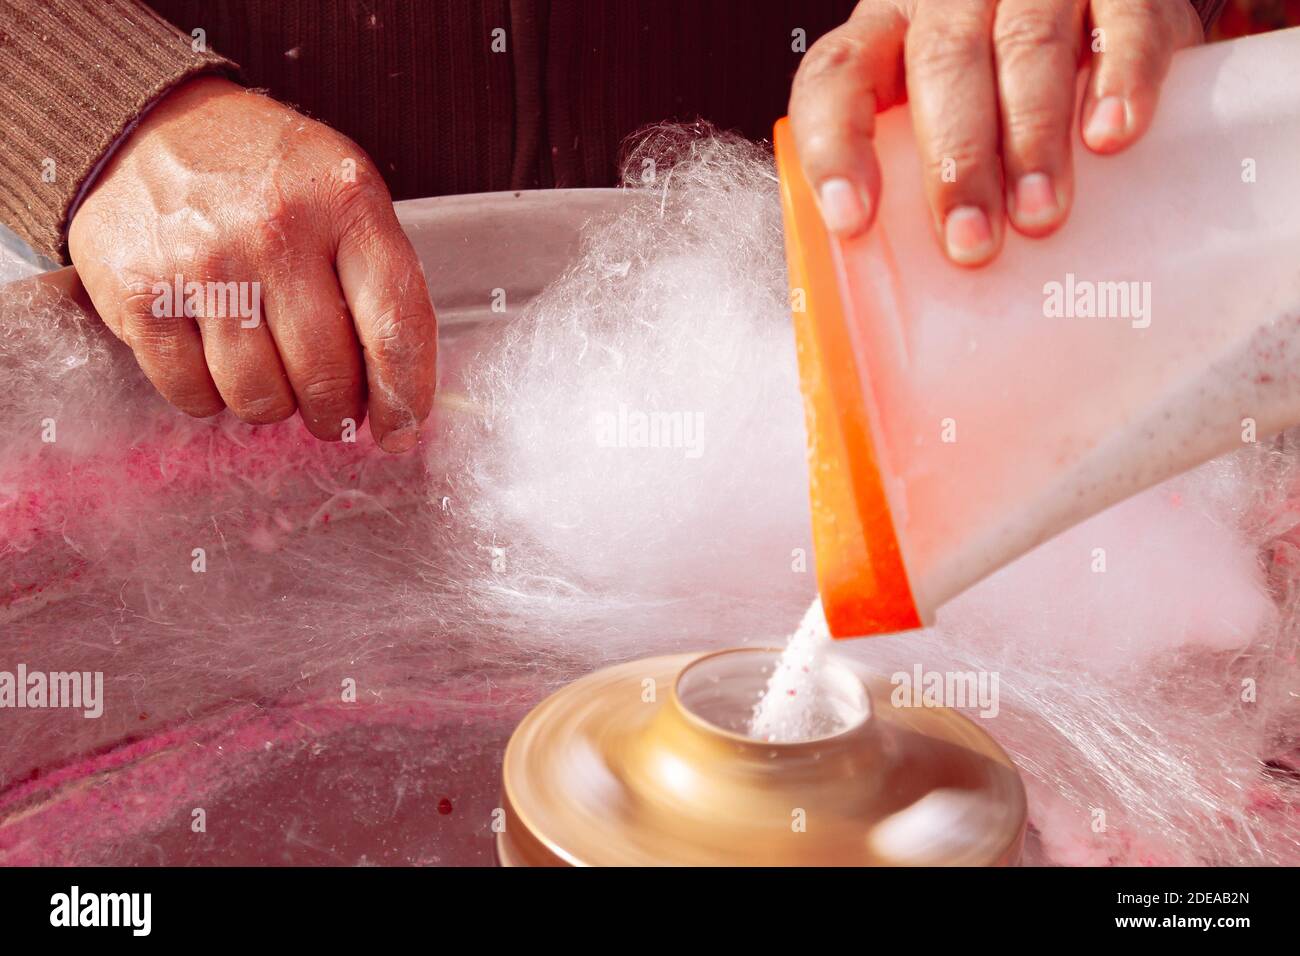 Man making of the Cotton candy with machine. Stock Photo